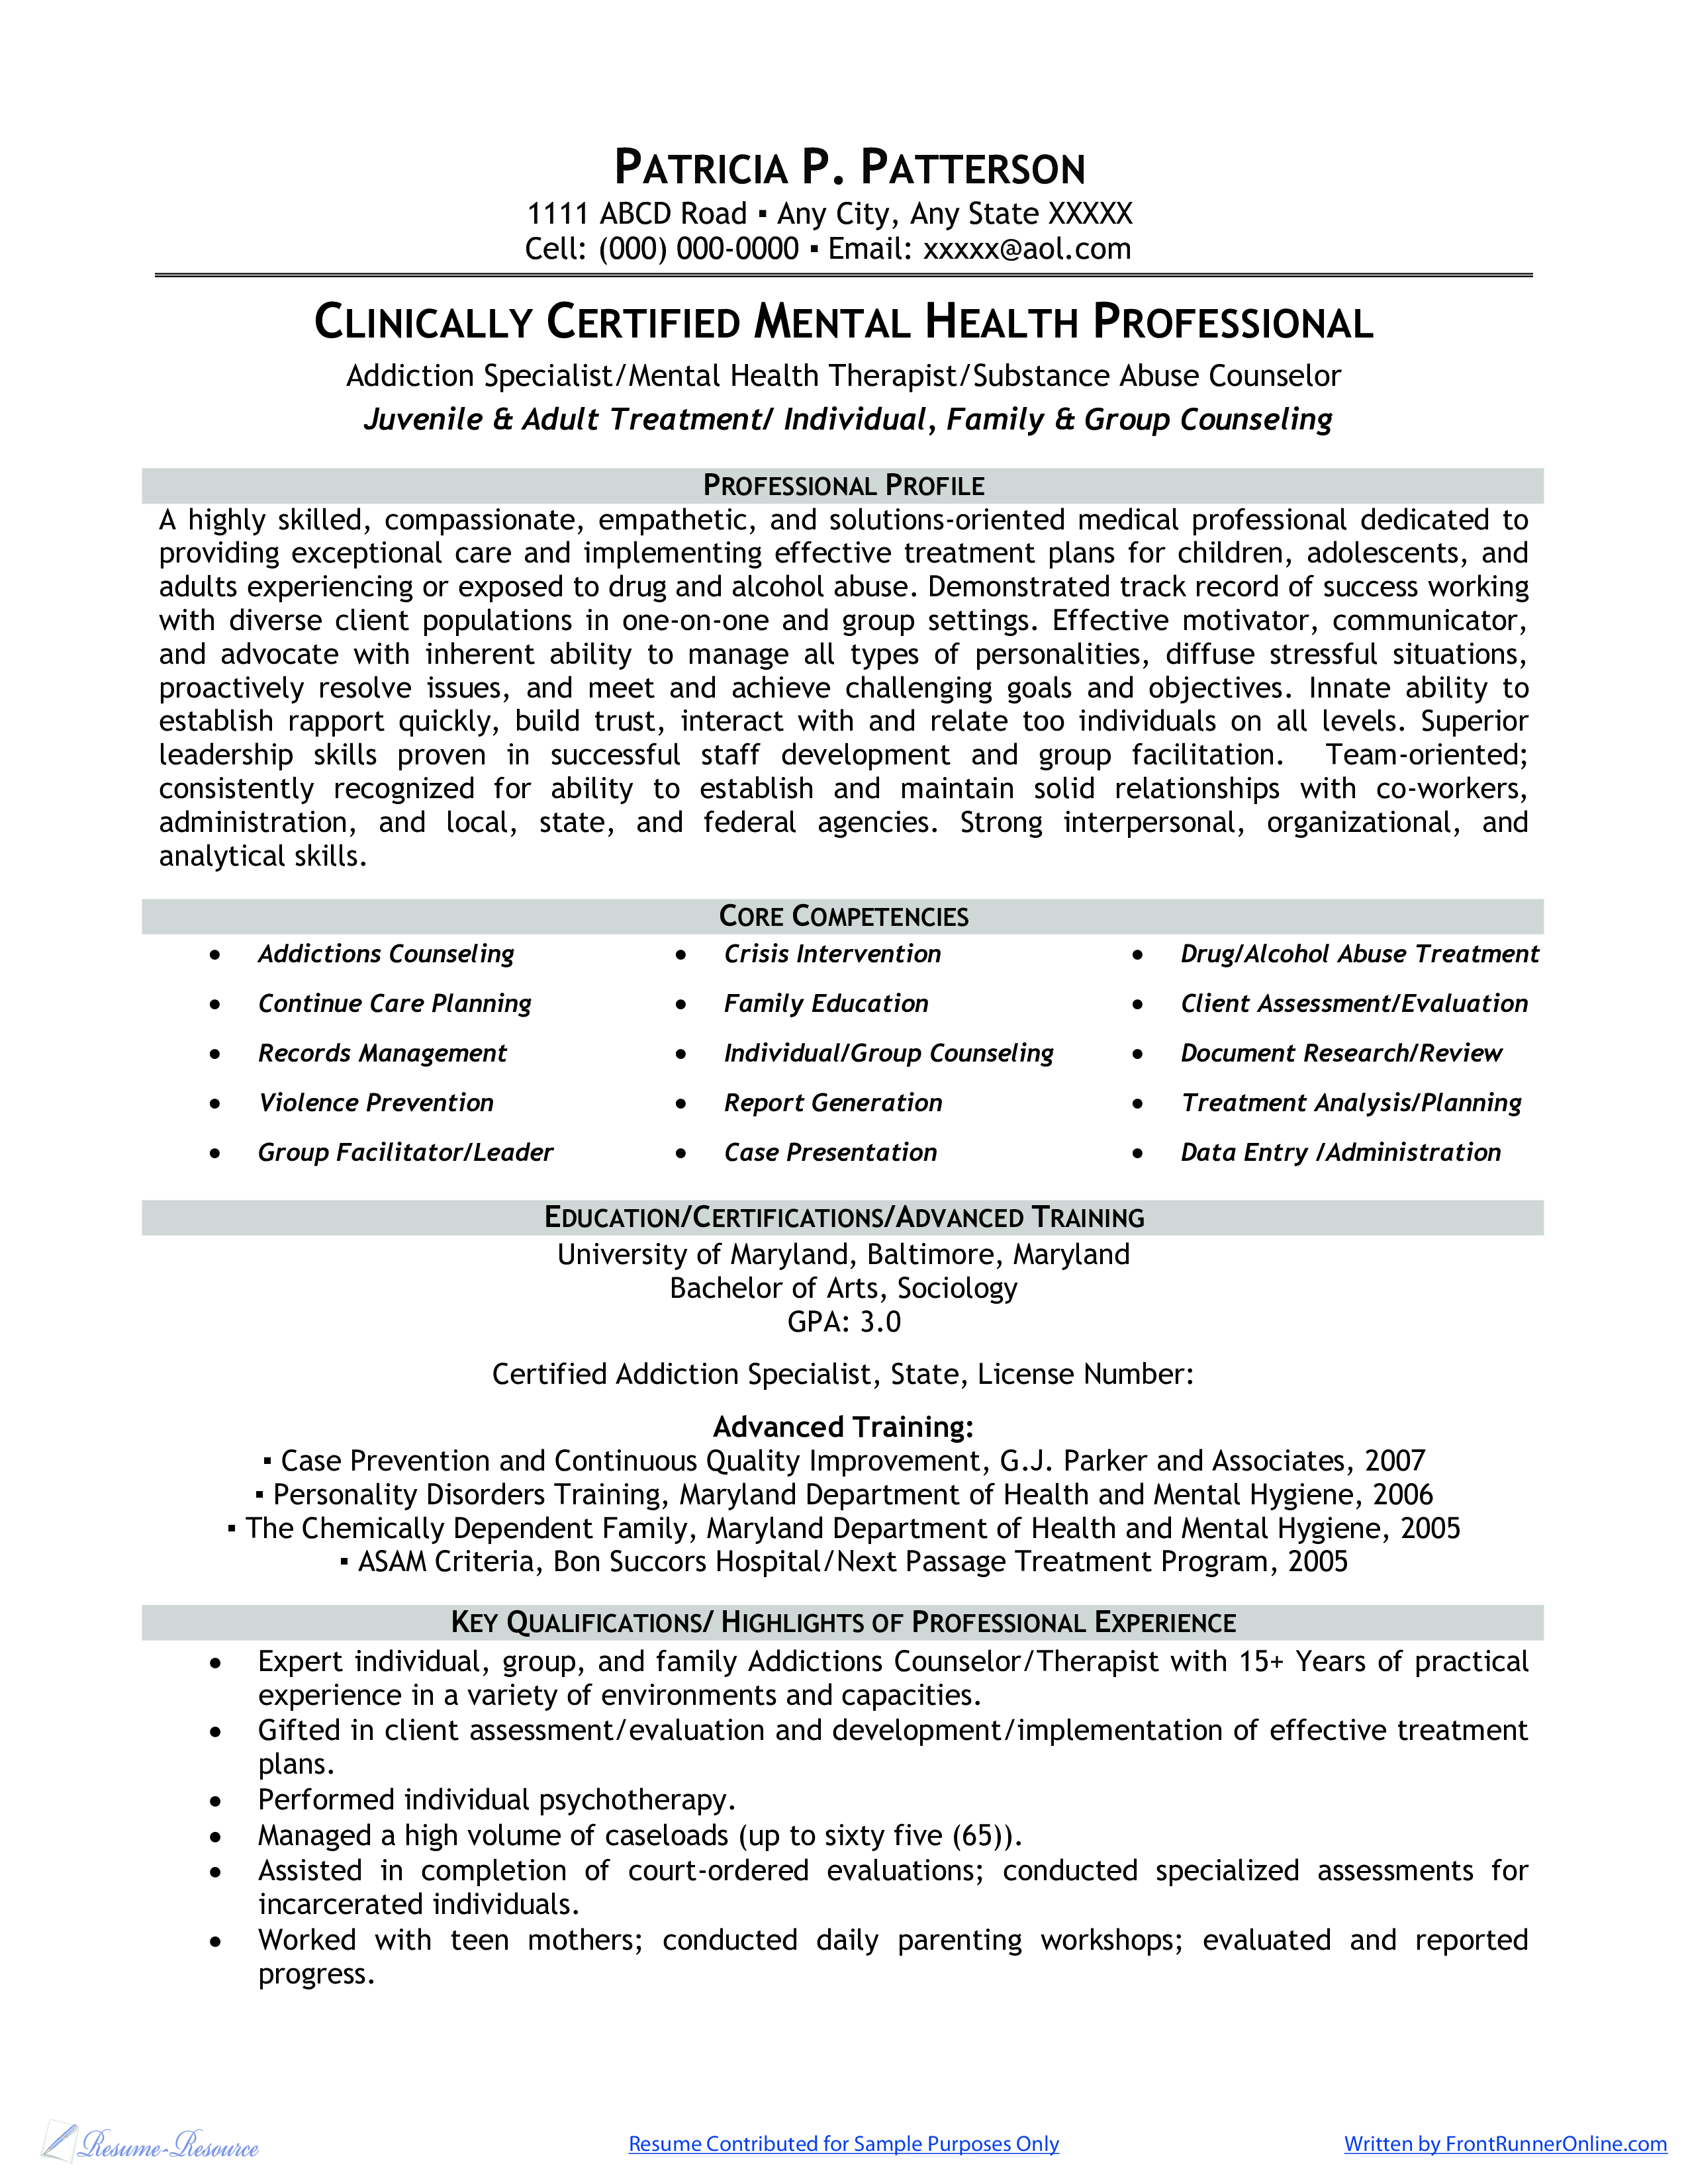 Sample resumes for job in mental health care field